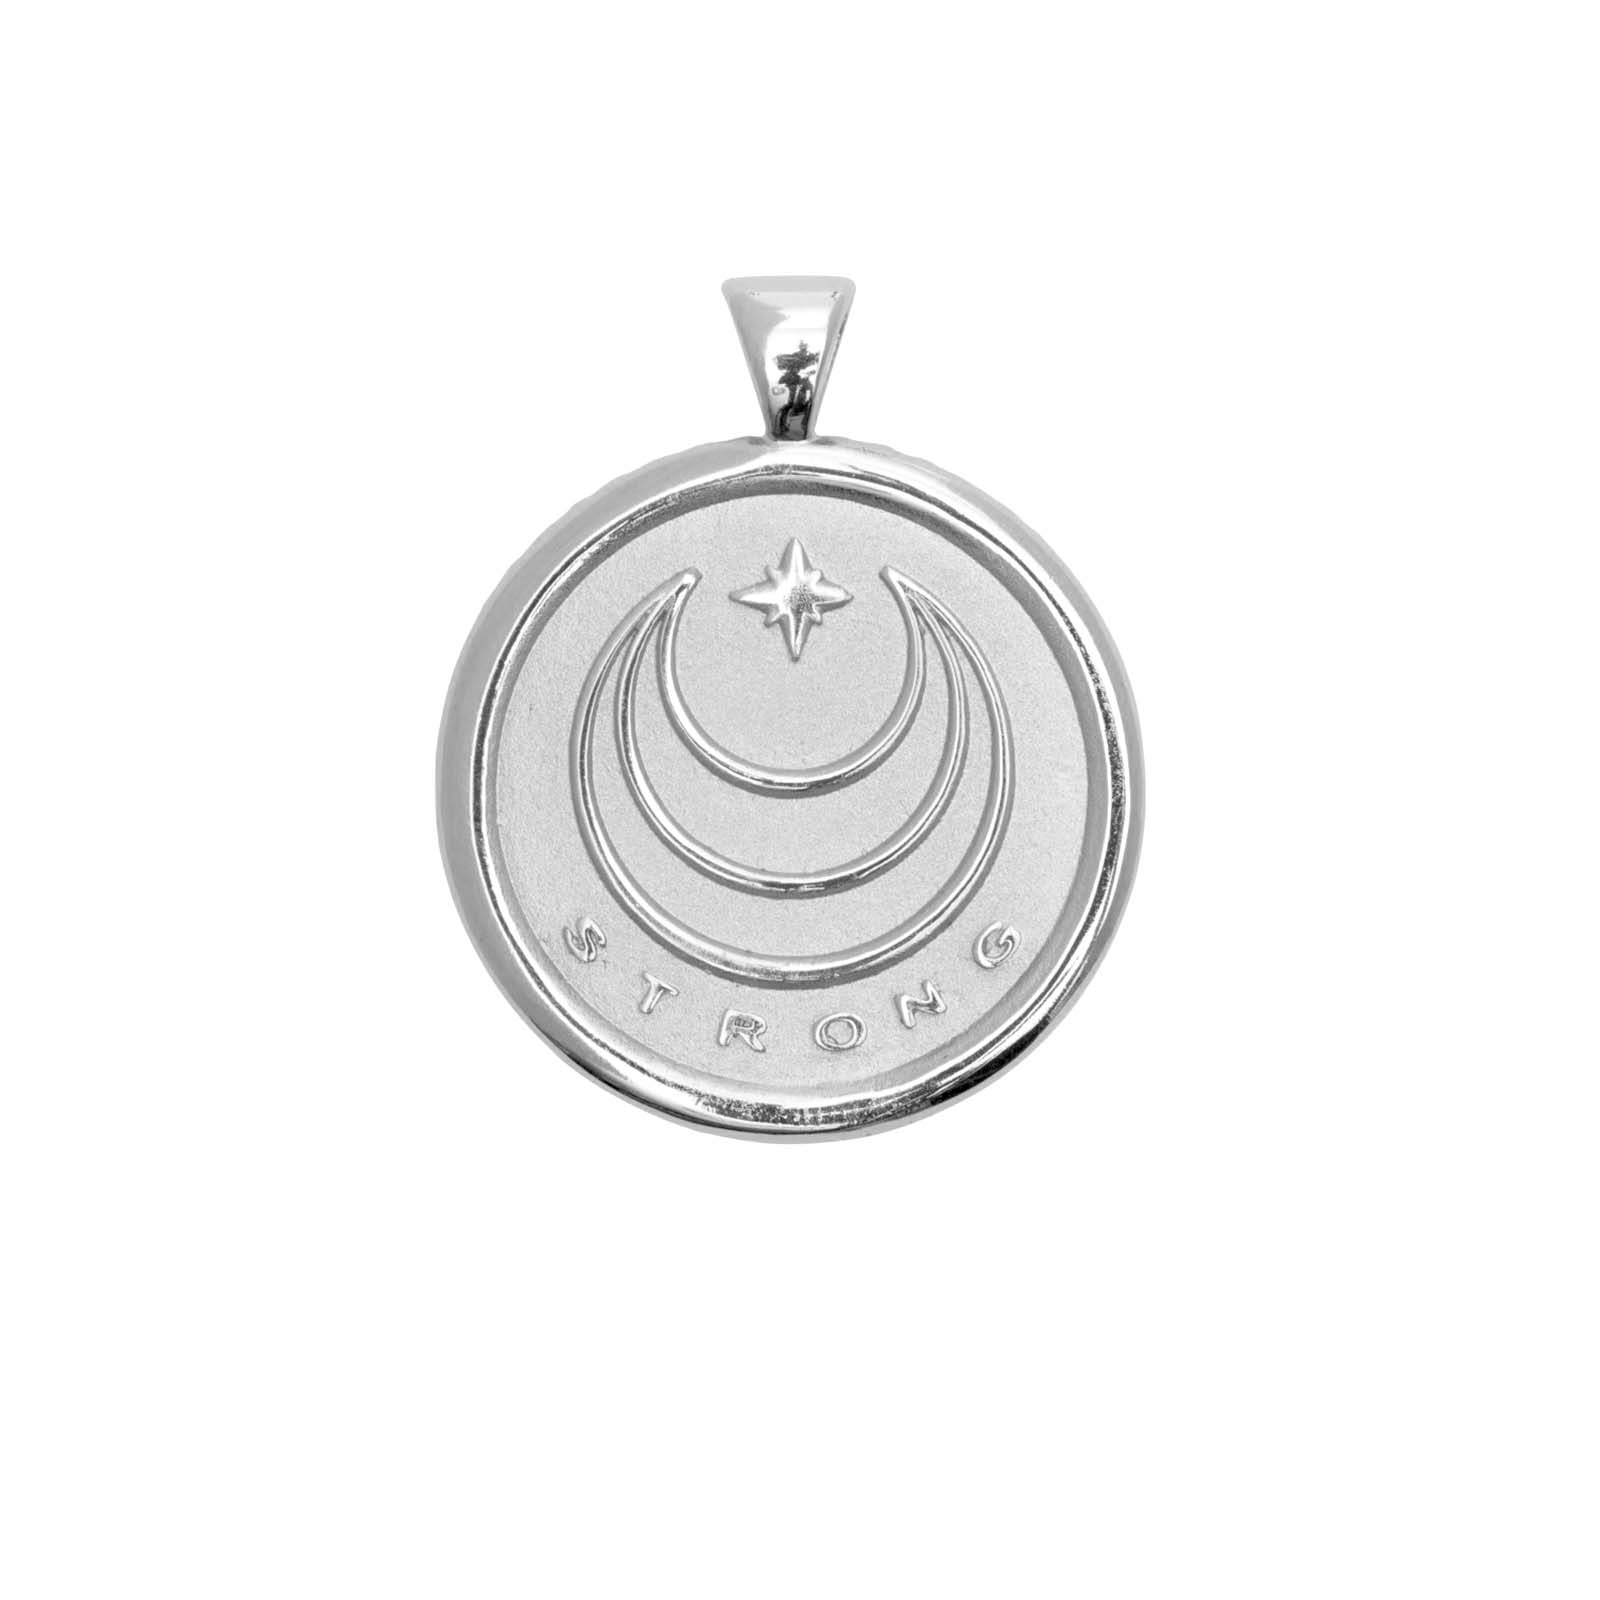 STRONG JW Original Pendant Coin in Silver